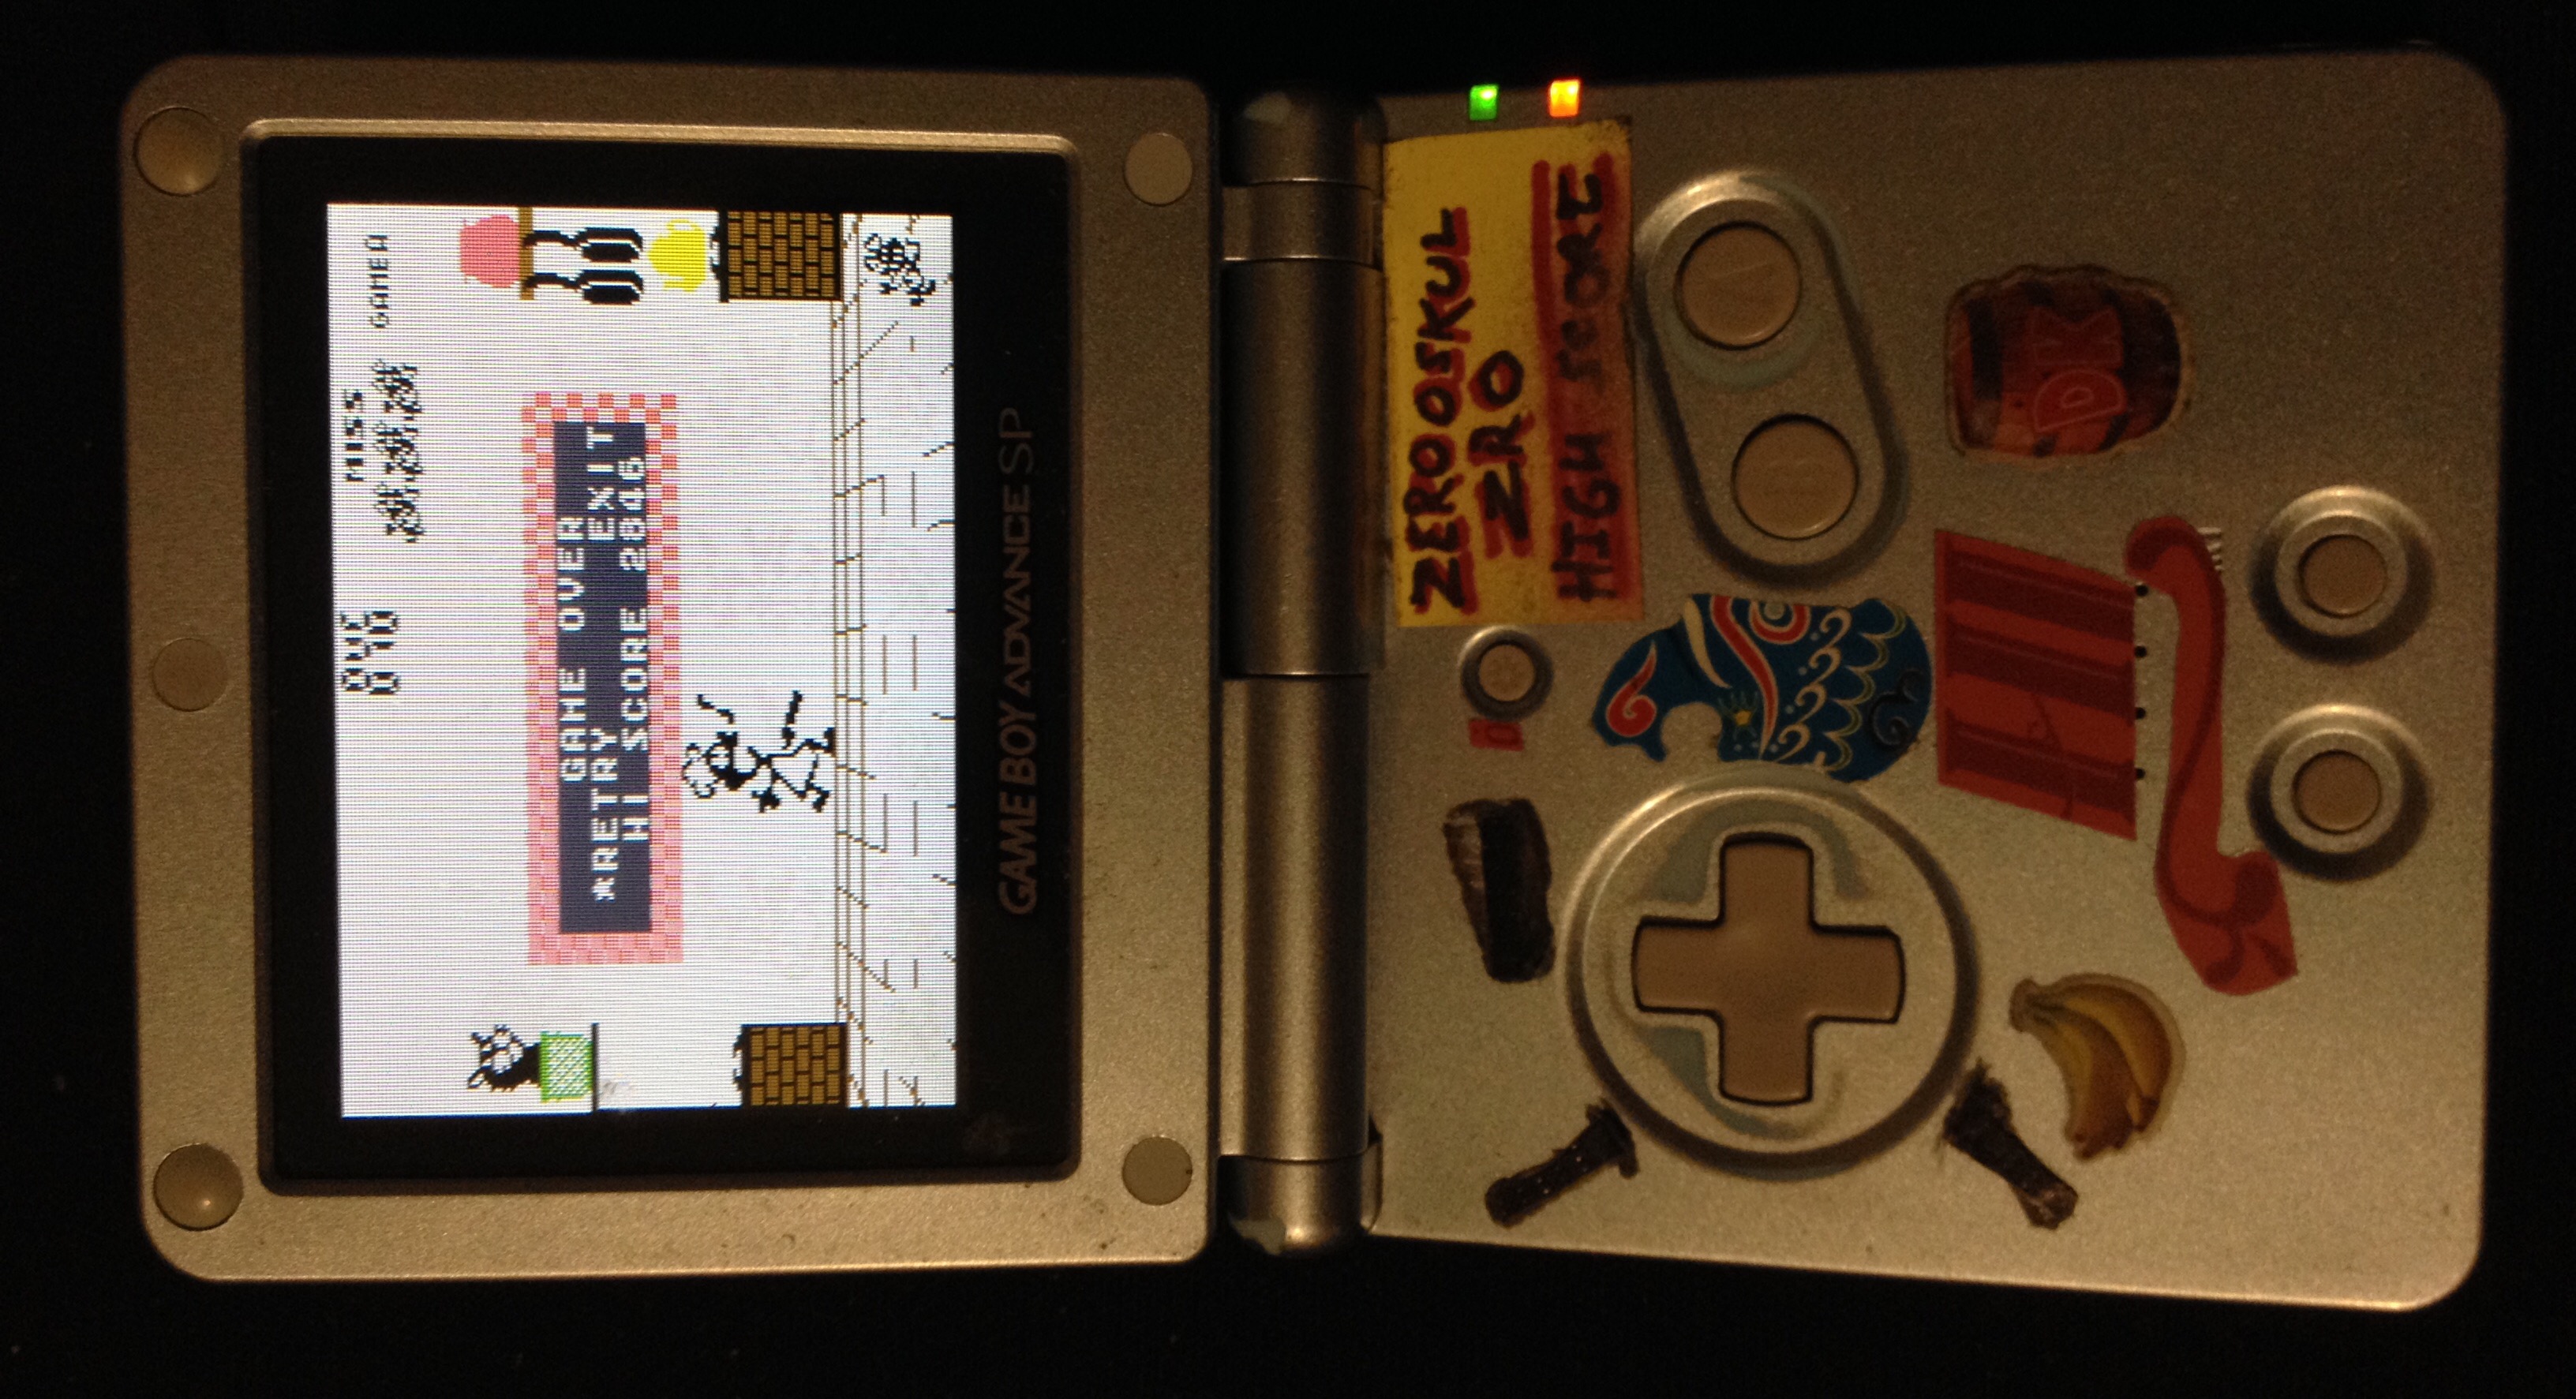 zerooskul: Game & Watch Gallery 4: Chef [Classic: Easy] (GBA) 2,846 points on 2019-12-29 02:39:06